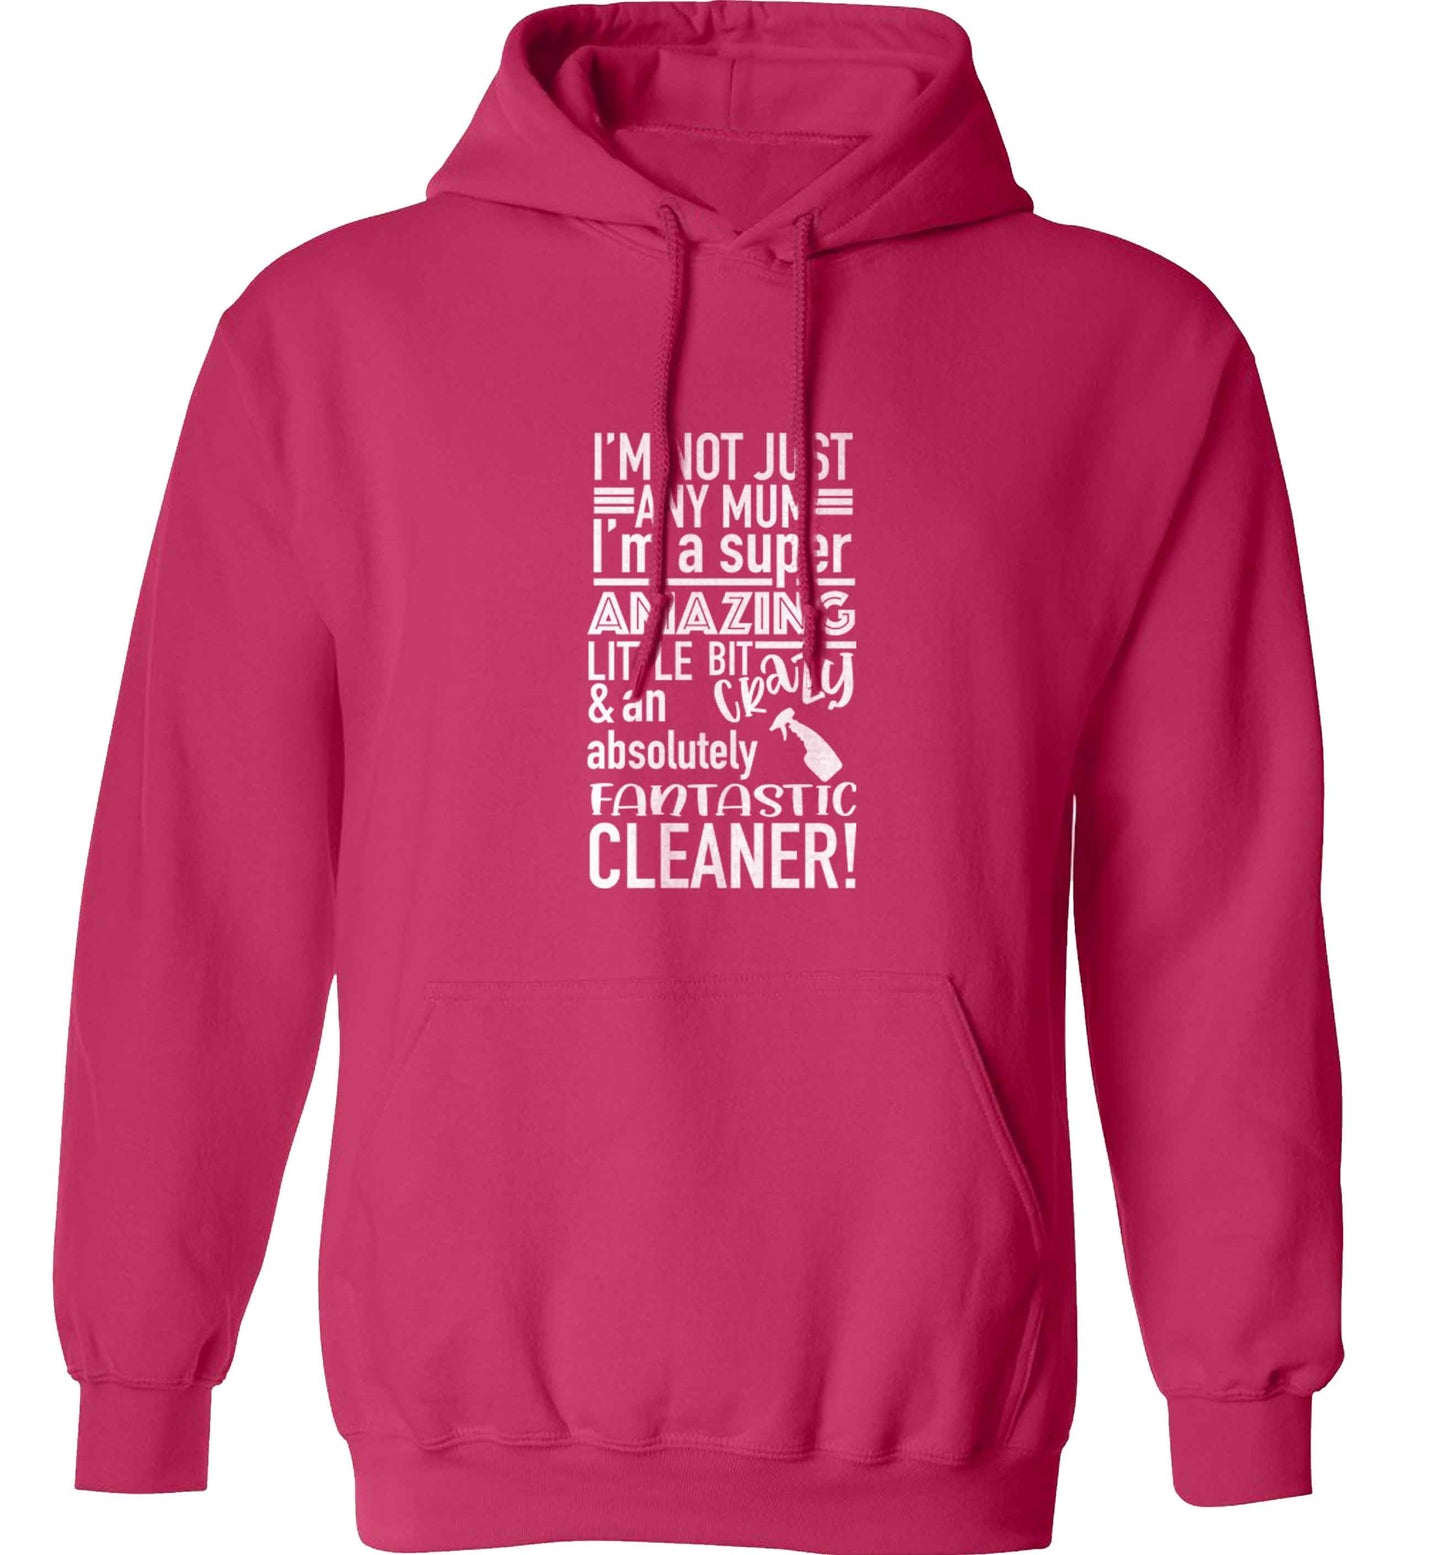 I'm not just any mum I'm a super amazing little bit crazy and an absolutely fantastic cleaner! adults unisex pink hoodie 2XL